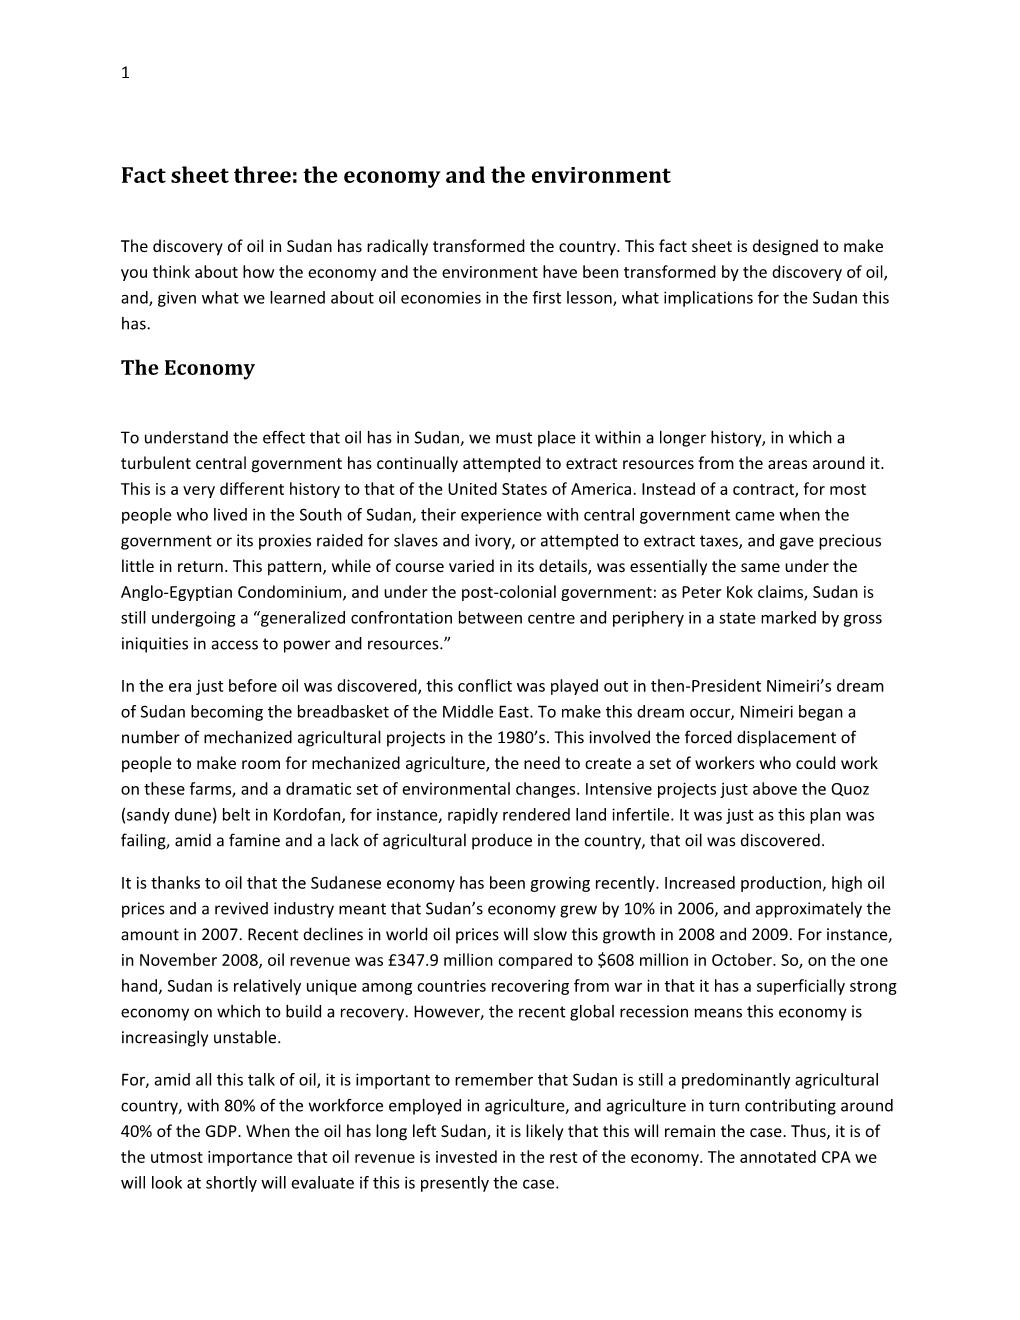 Fact Sheet Three: the Economy and the Environment